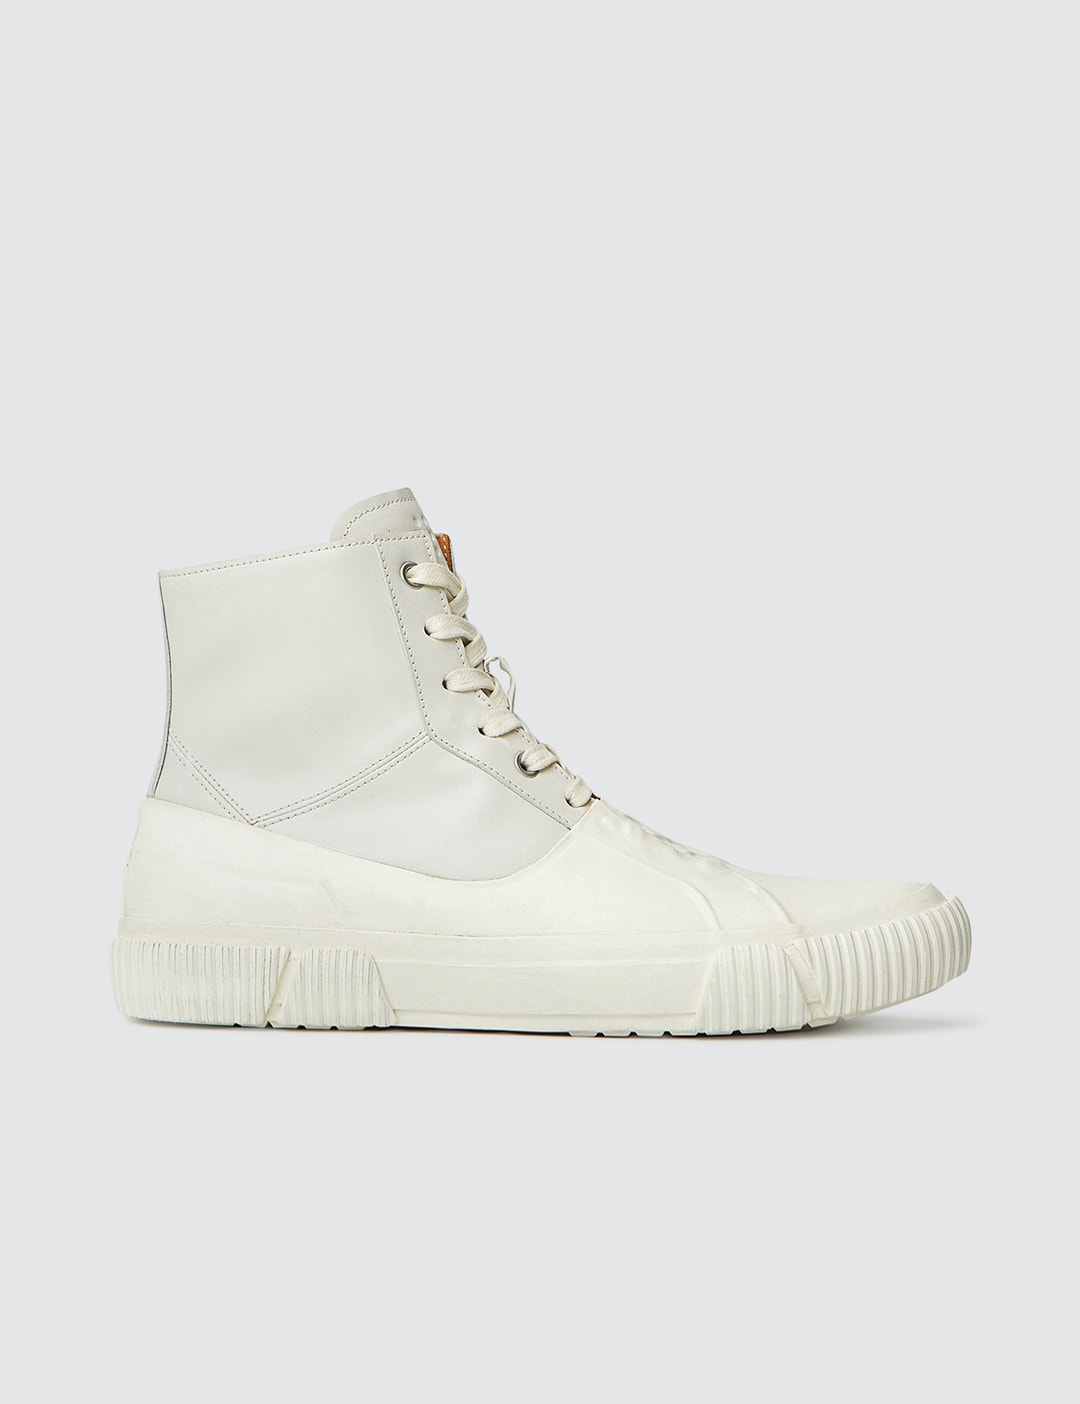 Both - Galosh High-top Runners | HBX - Globally Curated Fashion and ...